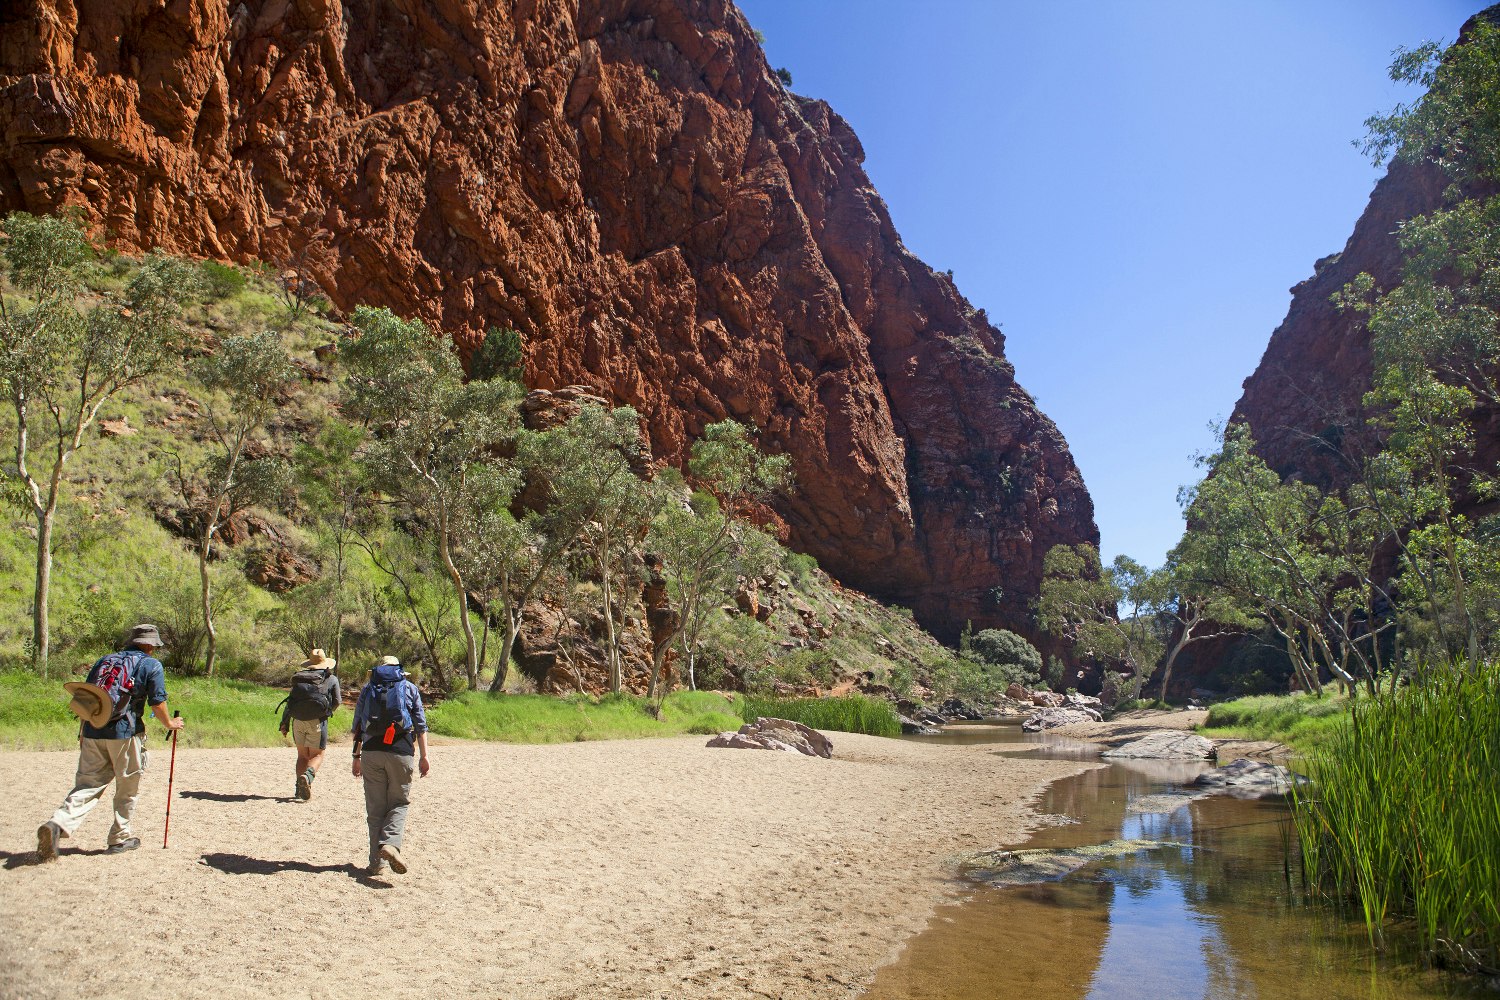 Bushwalkers at Simpsons Gap on the Larapinta Trail. Image by Andrew Bain / Lonely Planet